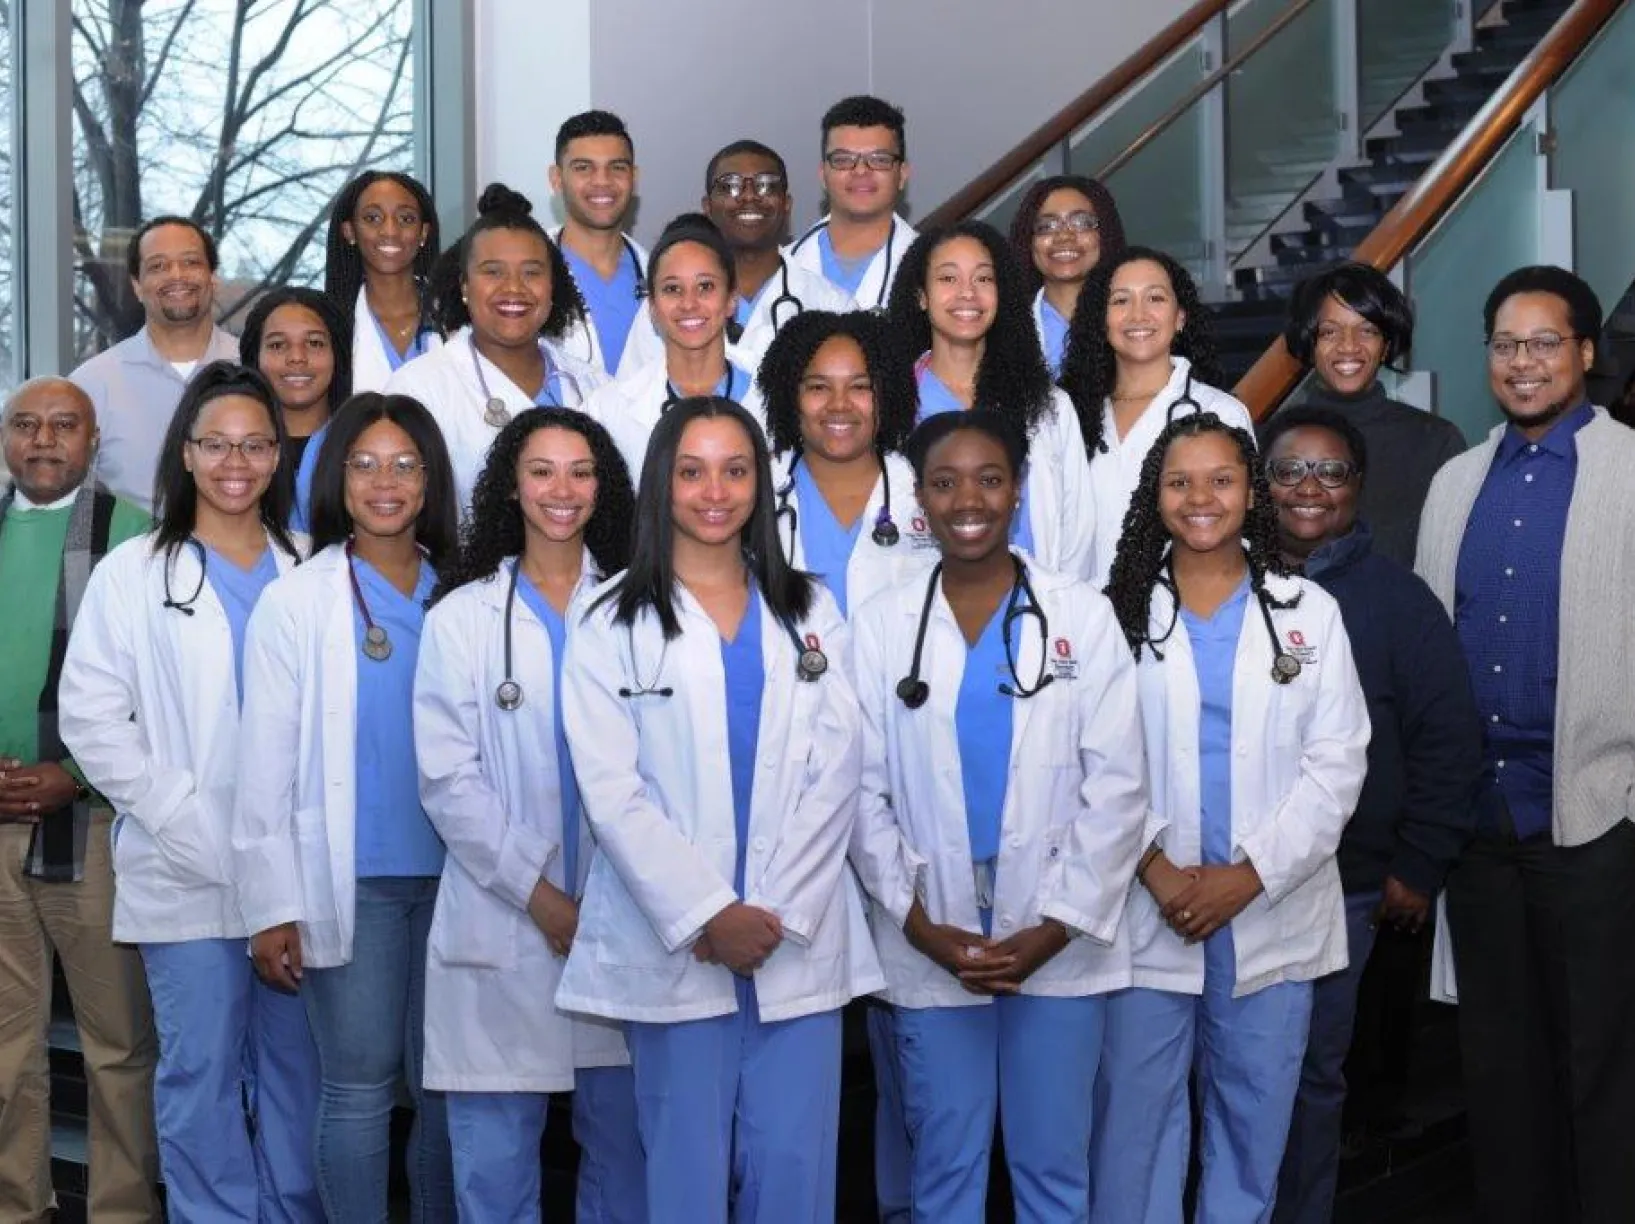 Group shot of veterinary students and doctors